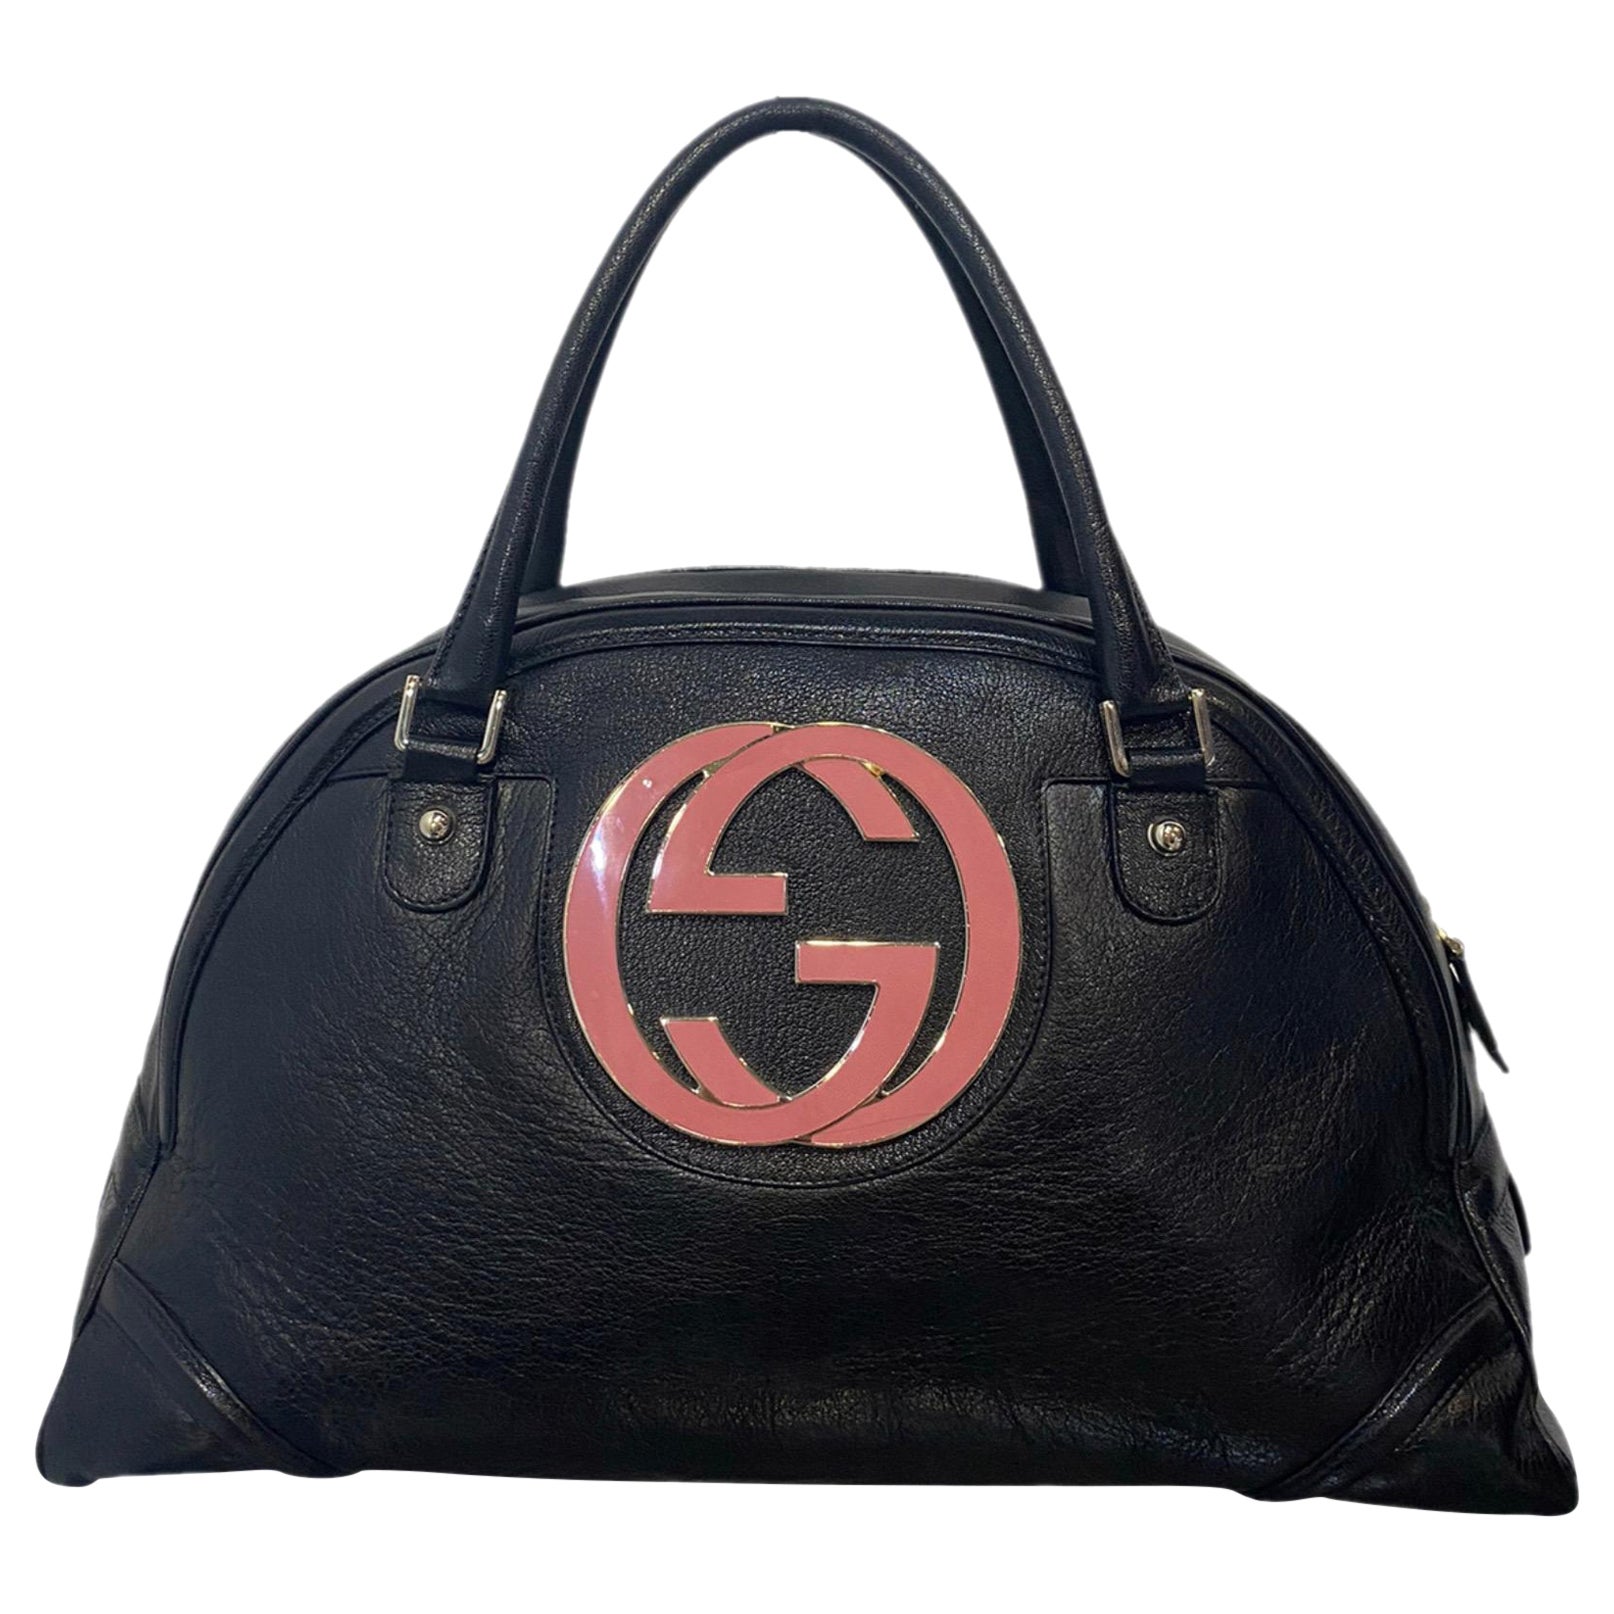 Gucci Blondie Black leather bag For Sale